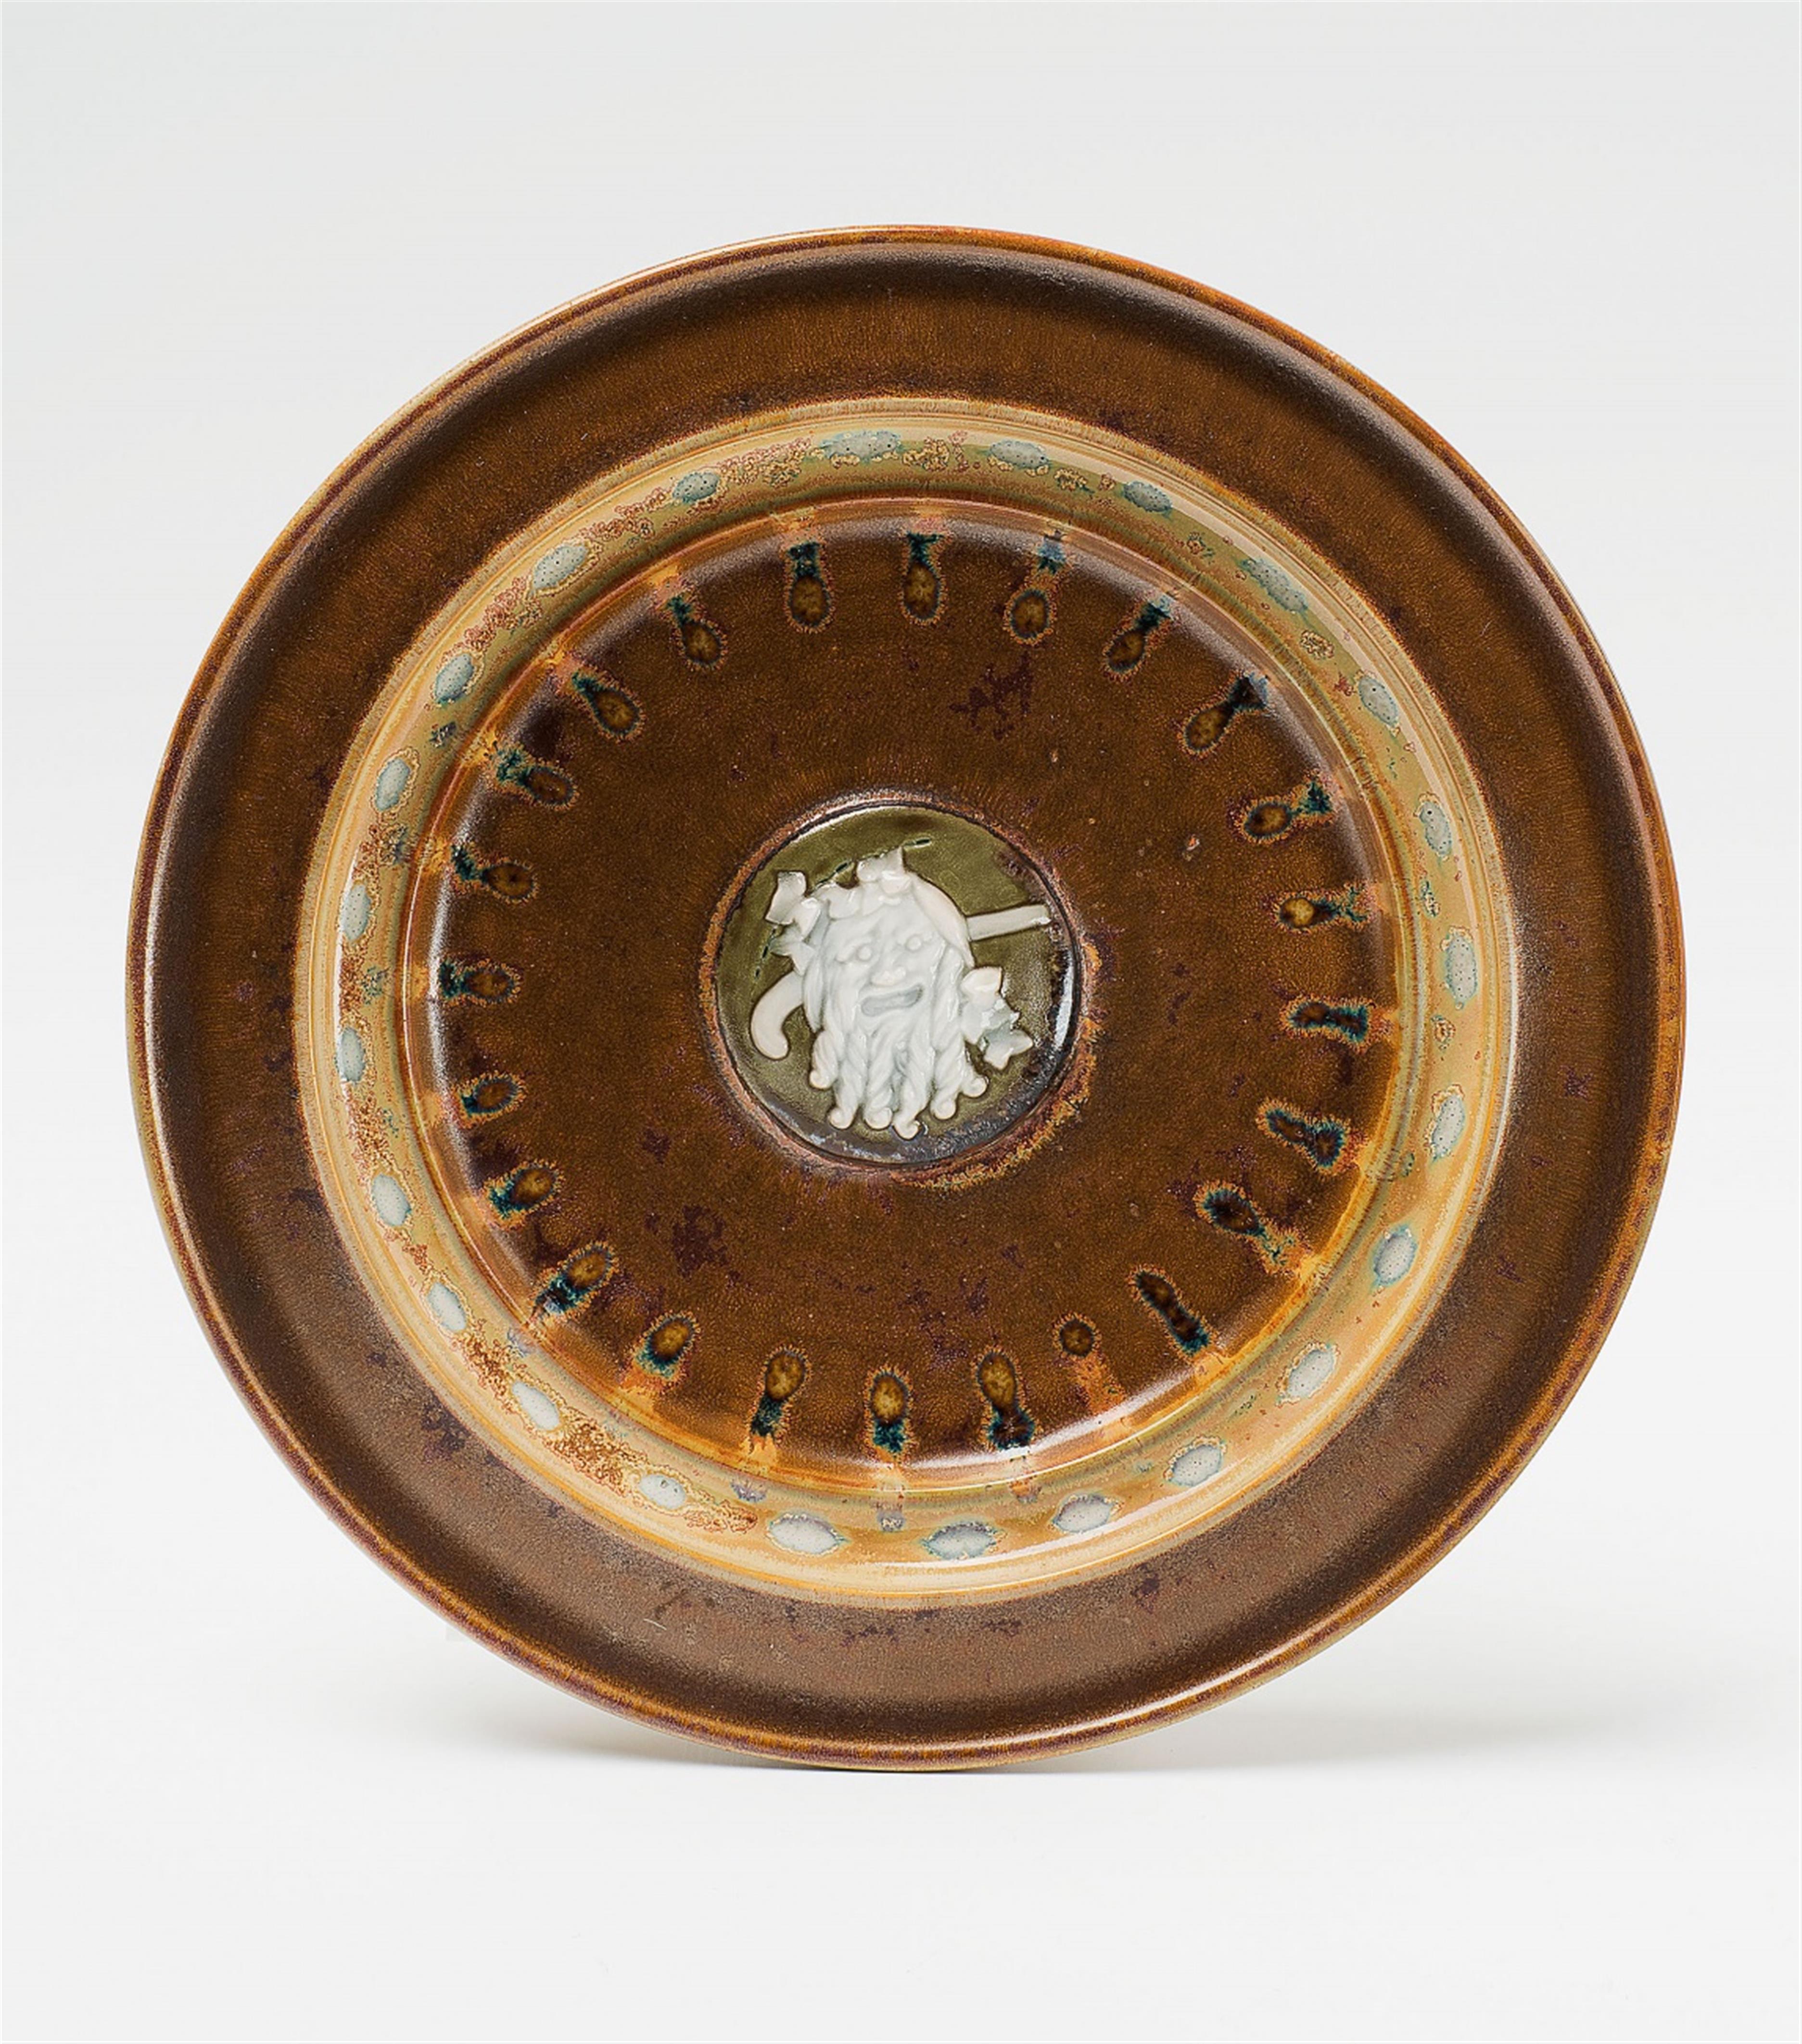 A Sèvres porcelain plate with Bacchus by Taxile Doat - image-1